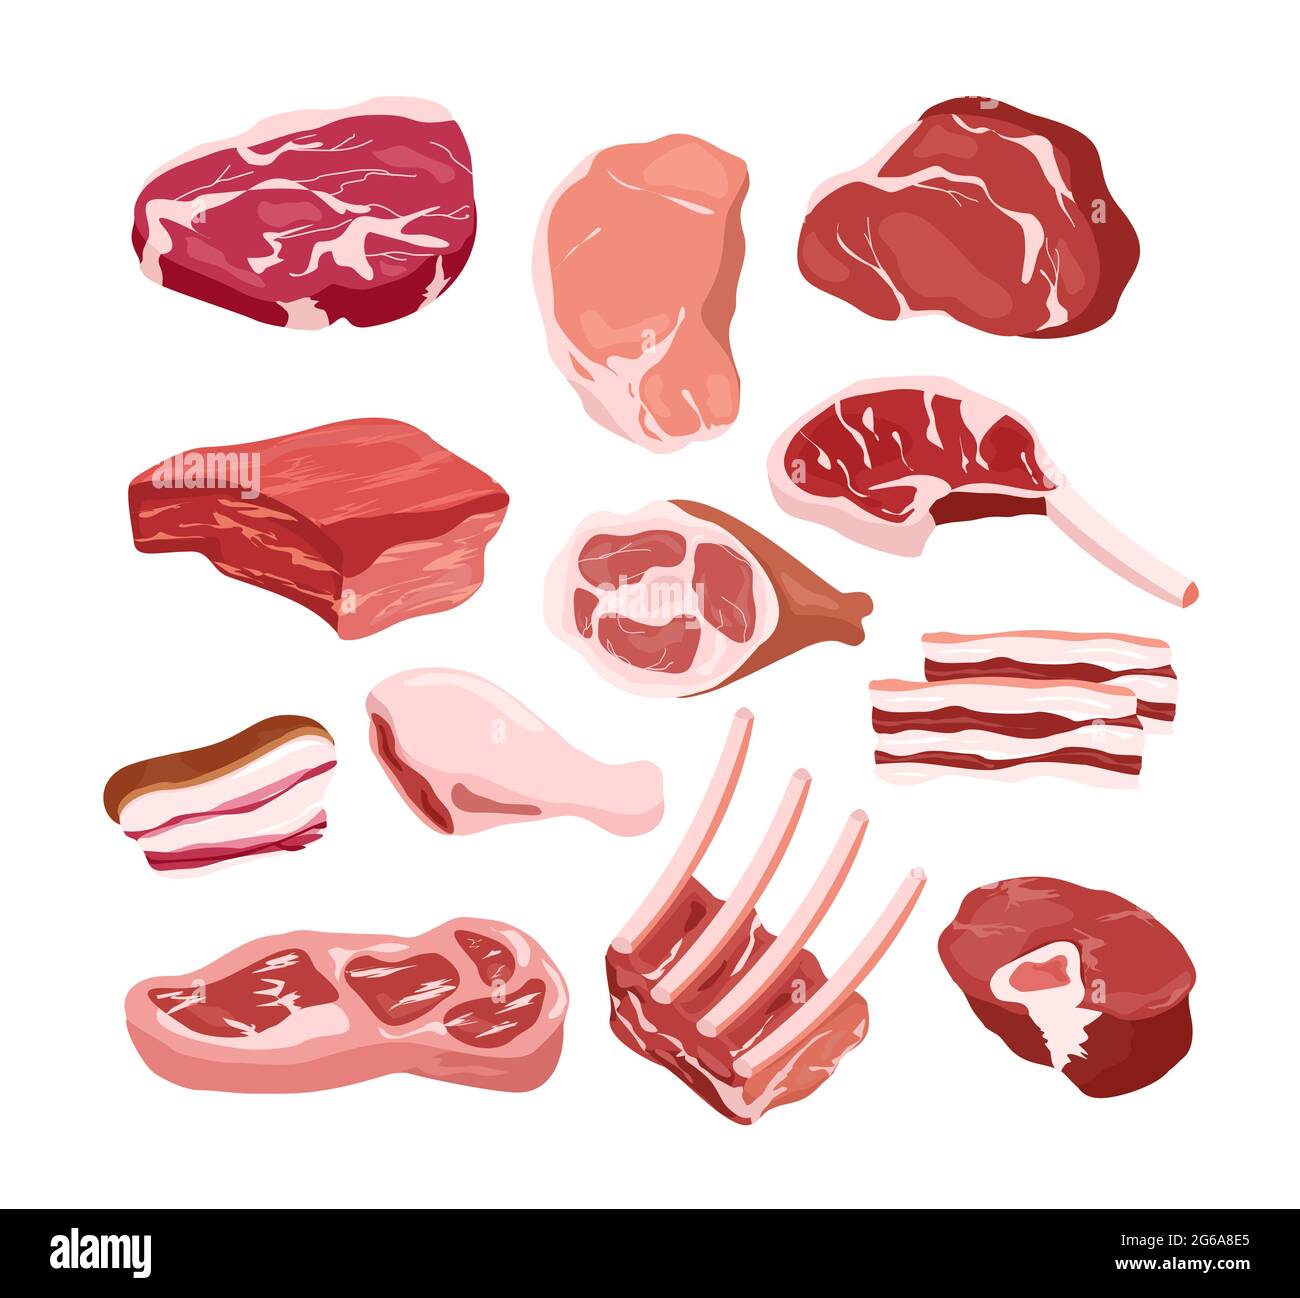 Vector illustration set of fresh tasty meat icons in flat style, isolated objects on white background. Gastronomic products, cook, steak, bbq concept. Stock Vector